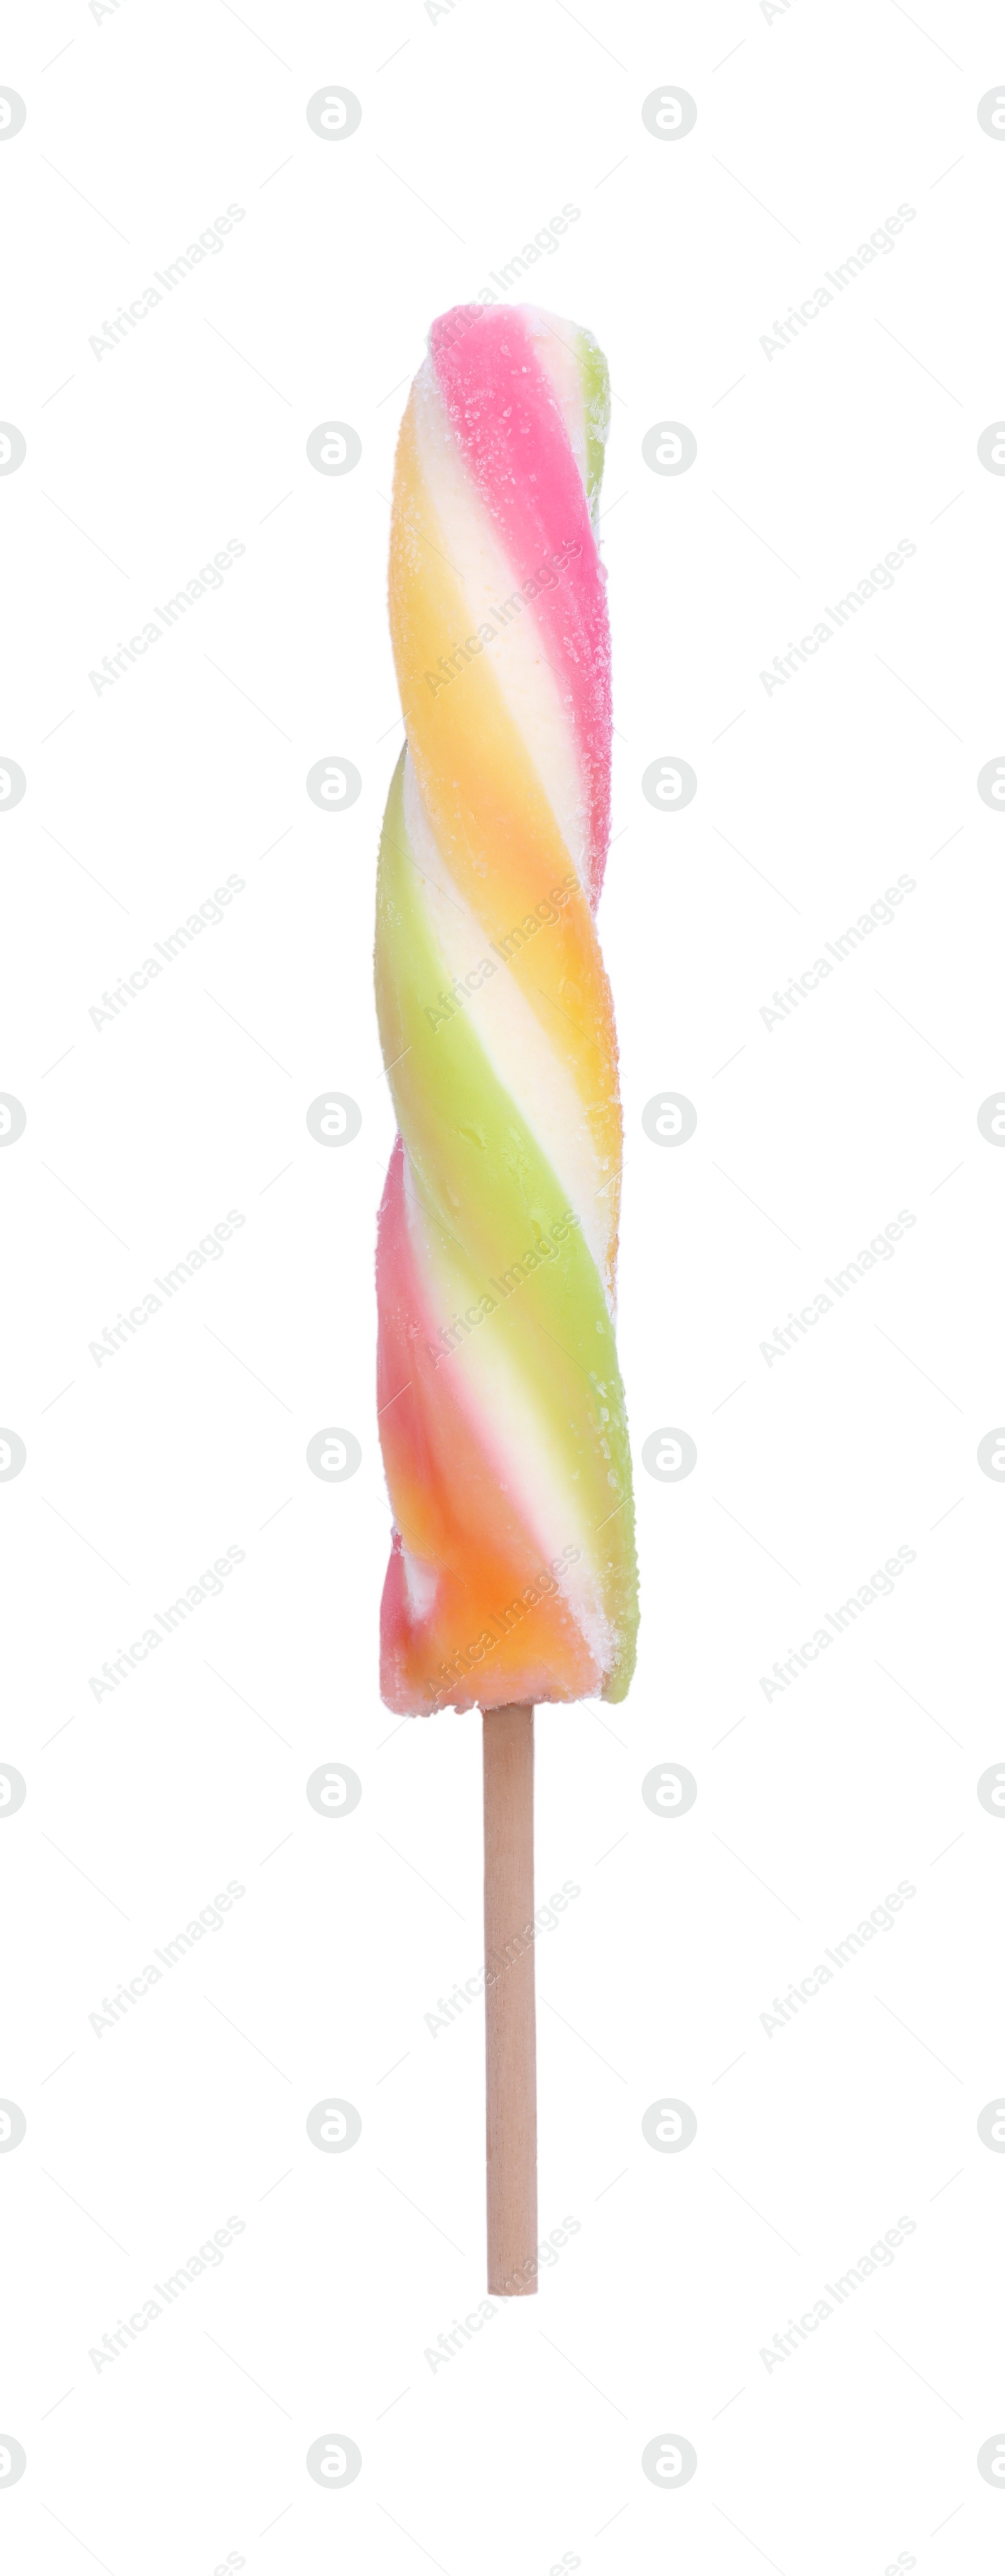 Photo of Delicious ice pop on white background, top view. Fruit popsicle